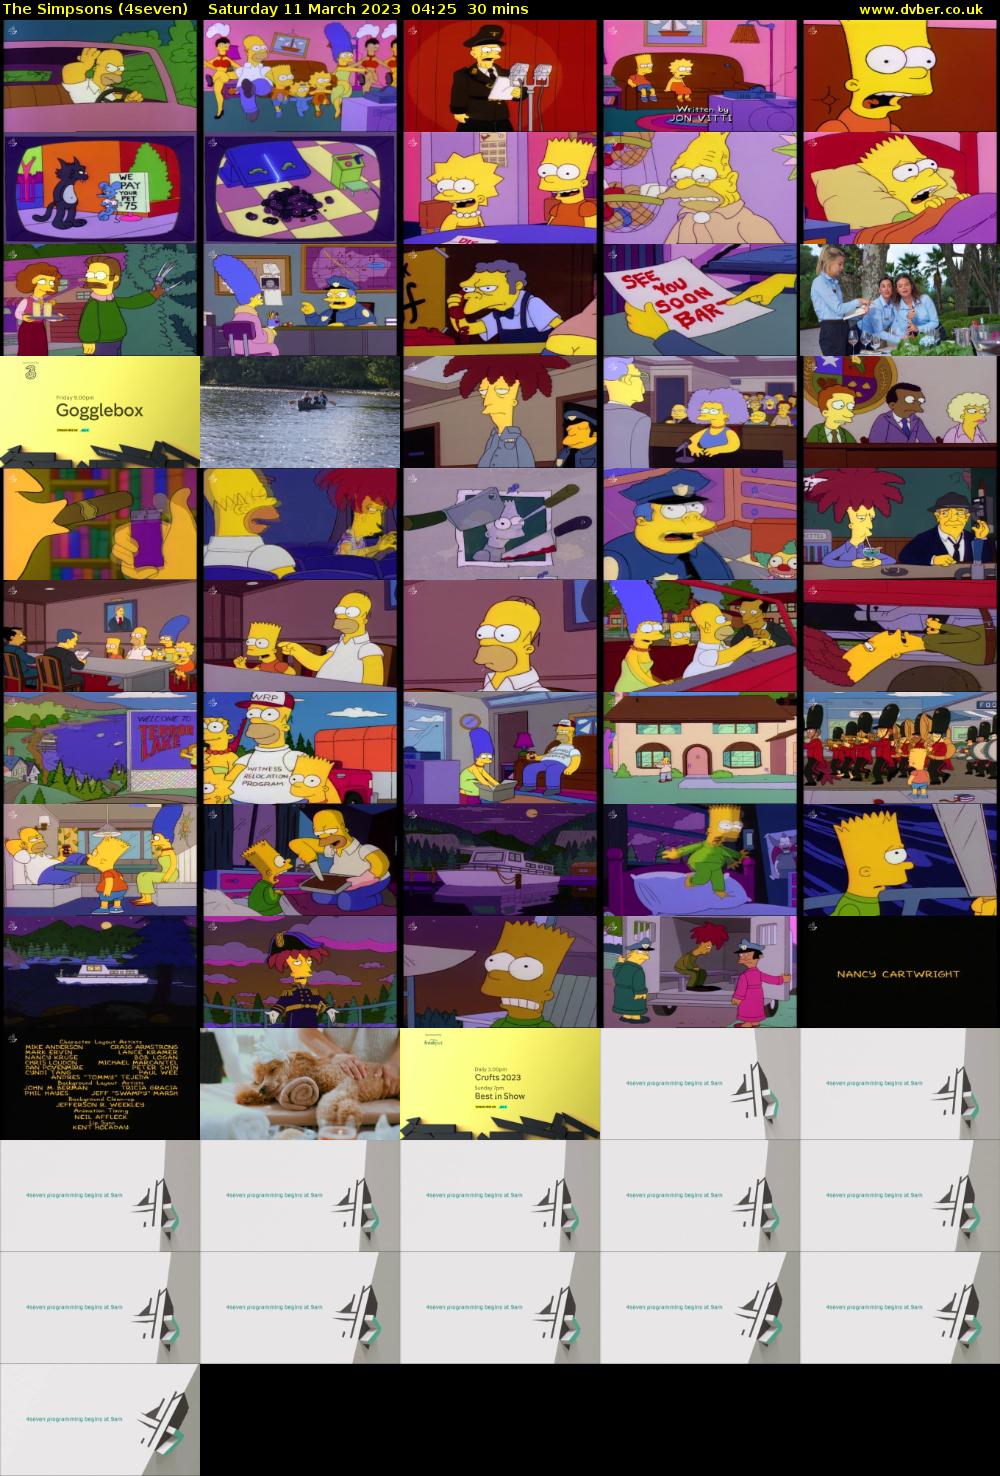 The Simpsons (4seven) Saturday 11 March 2023 04:25 - 04:55